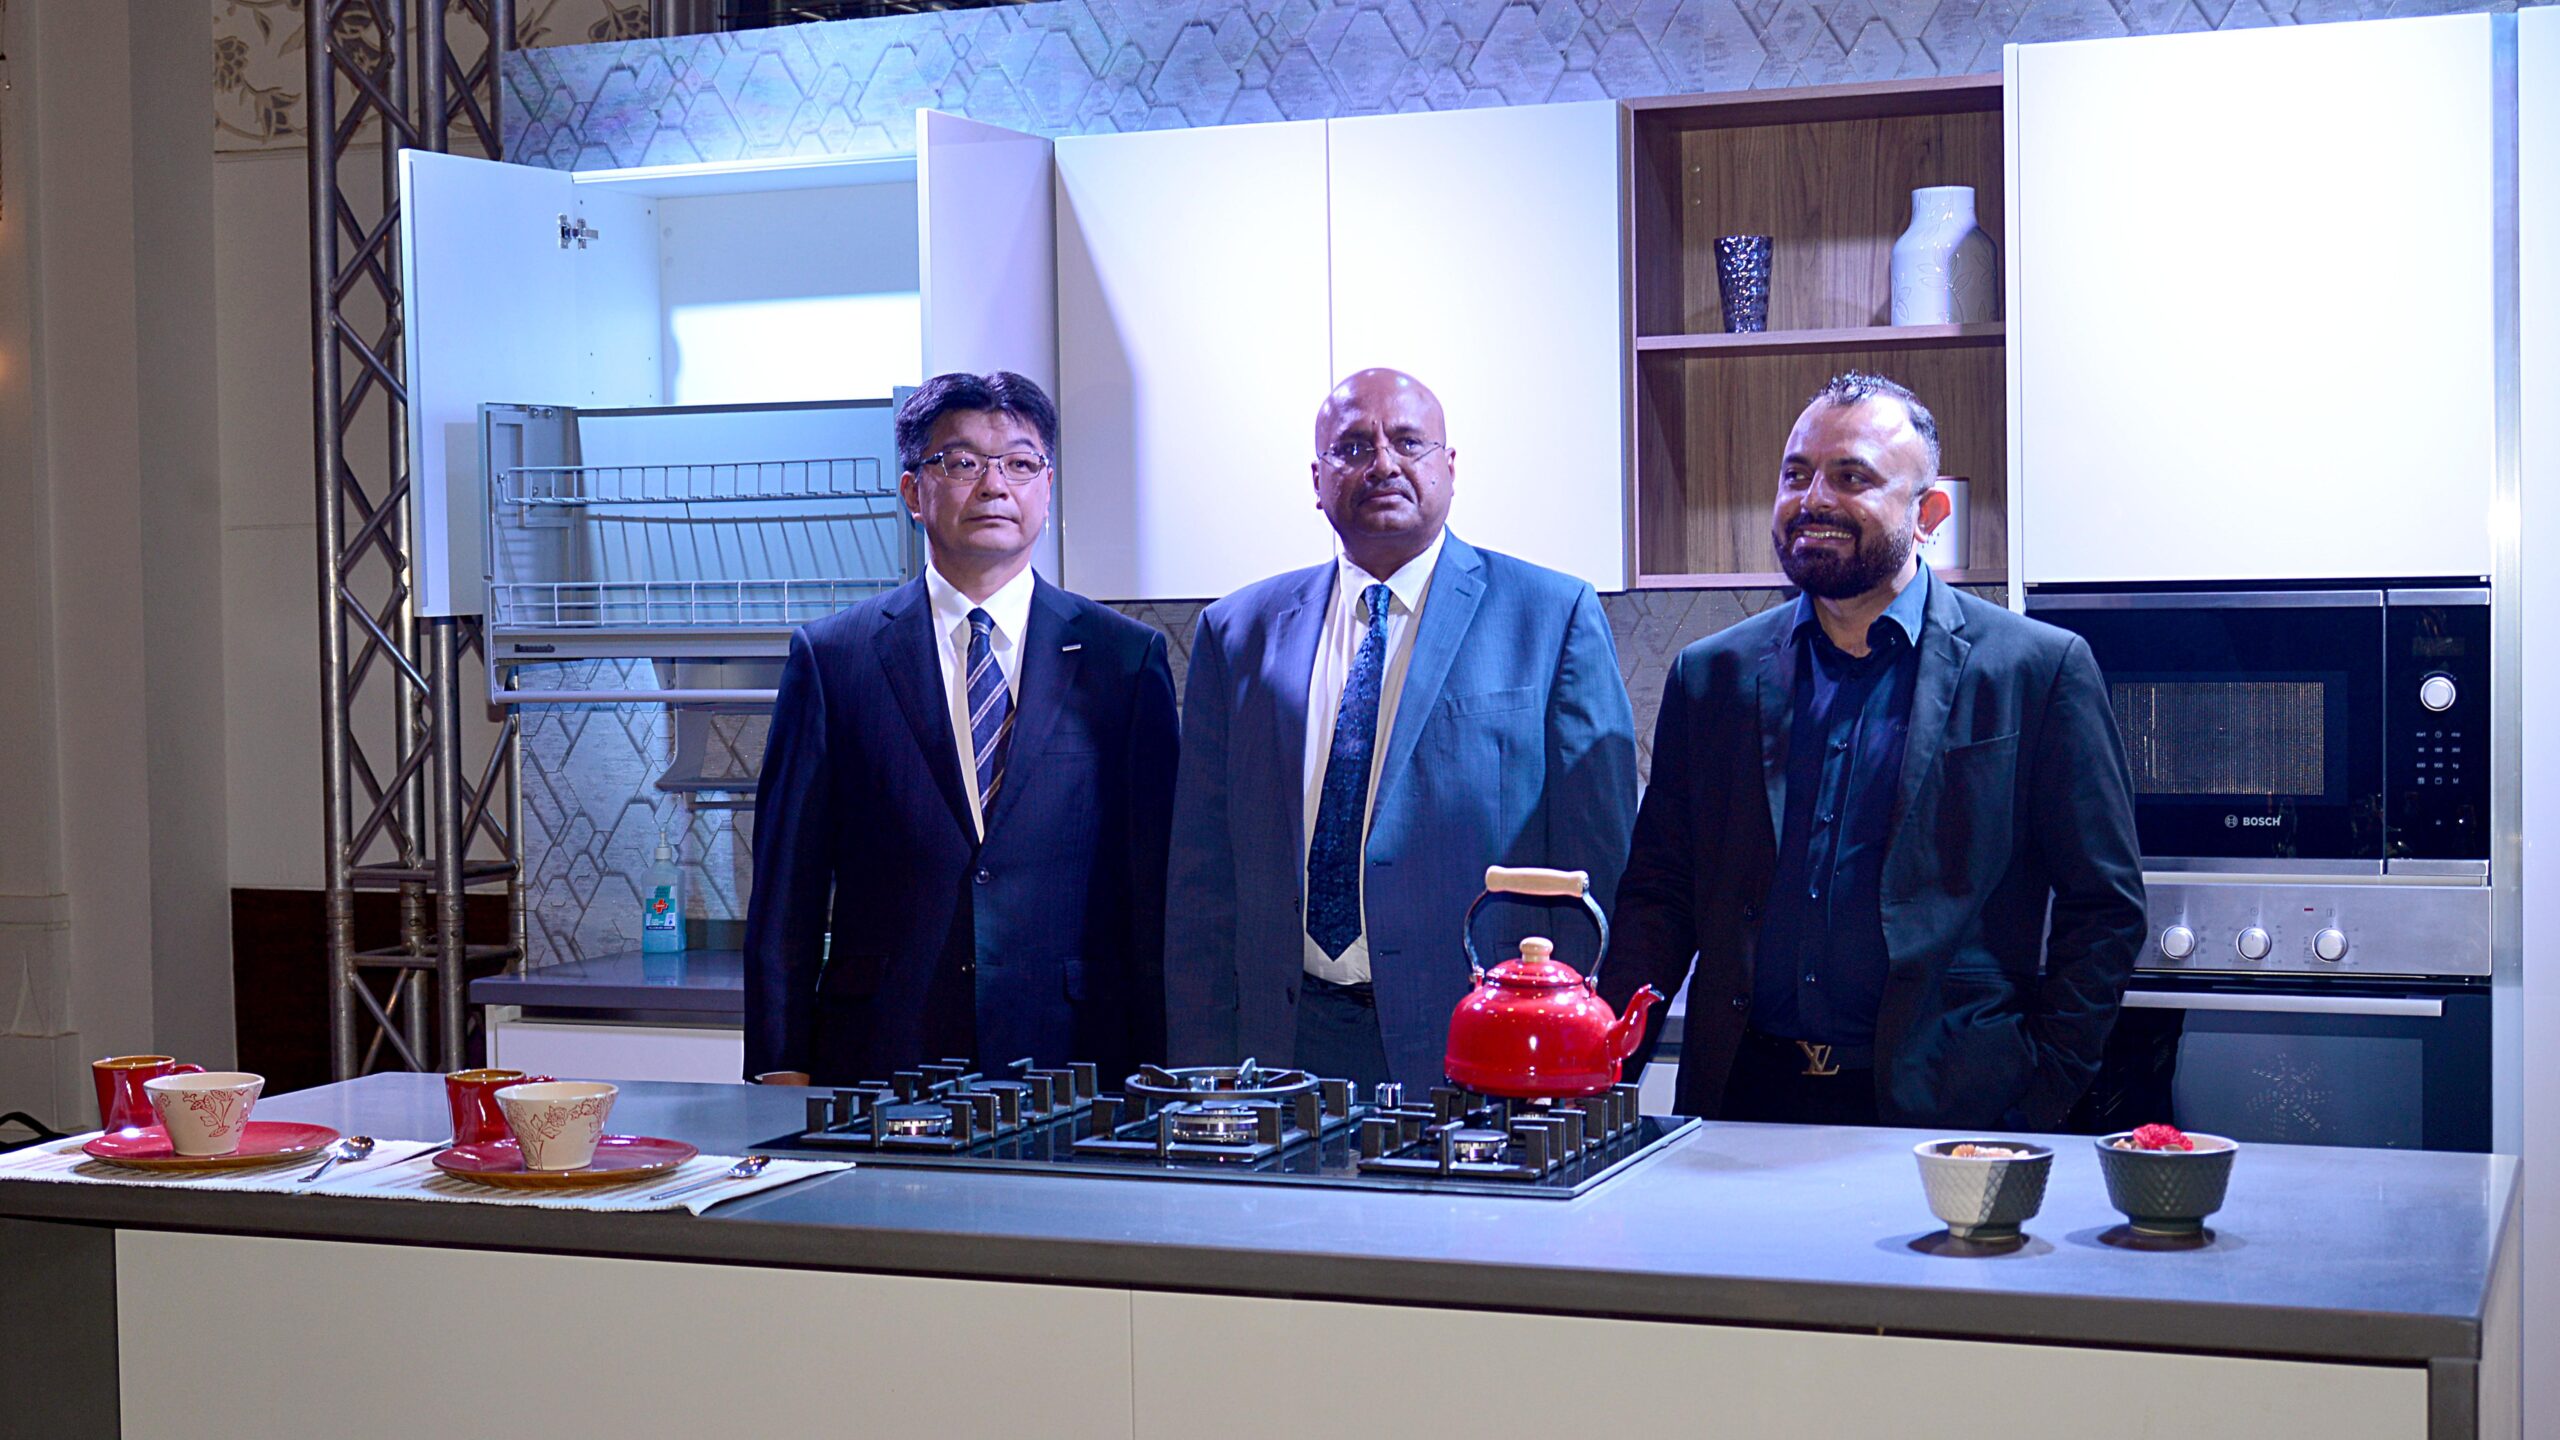 Panasonic Launches Its New I Class Modular Kitchen Range In India Scaled 